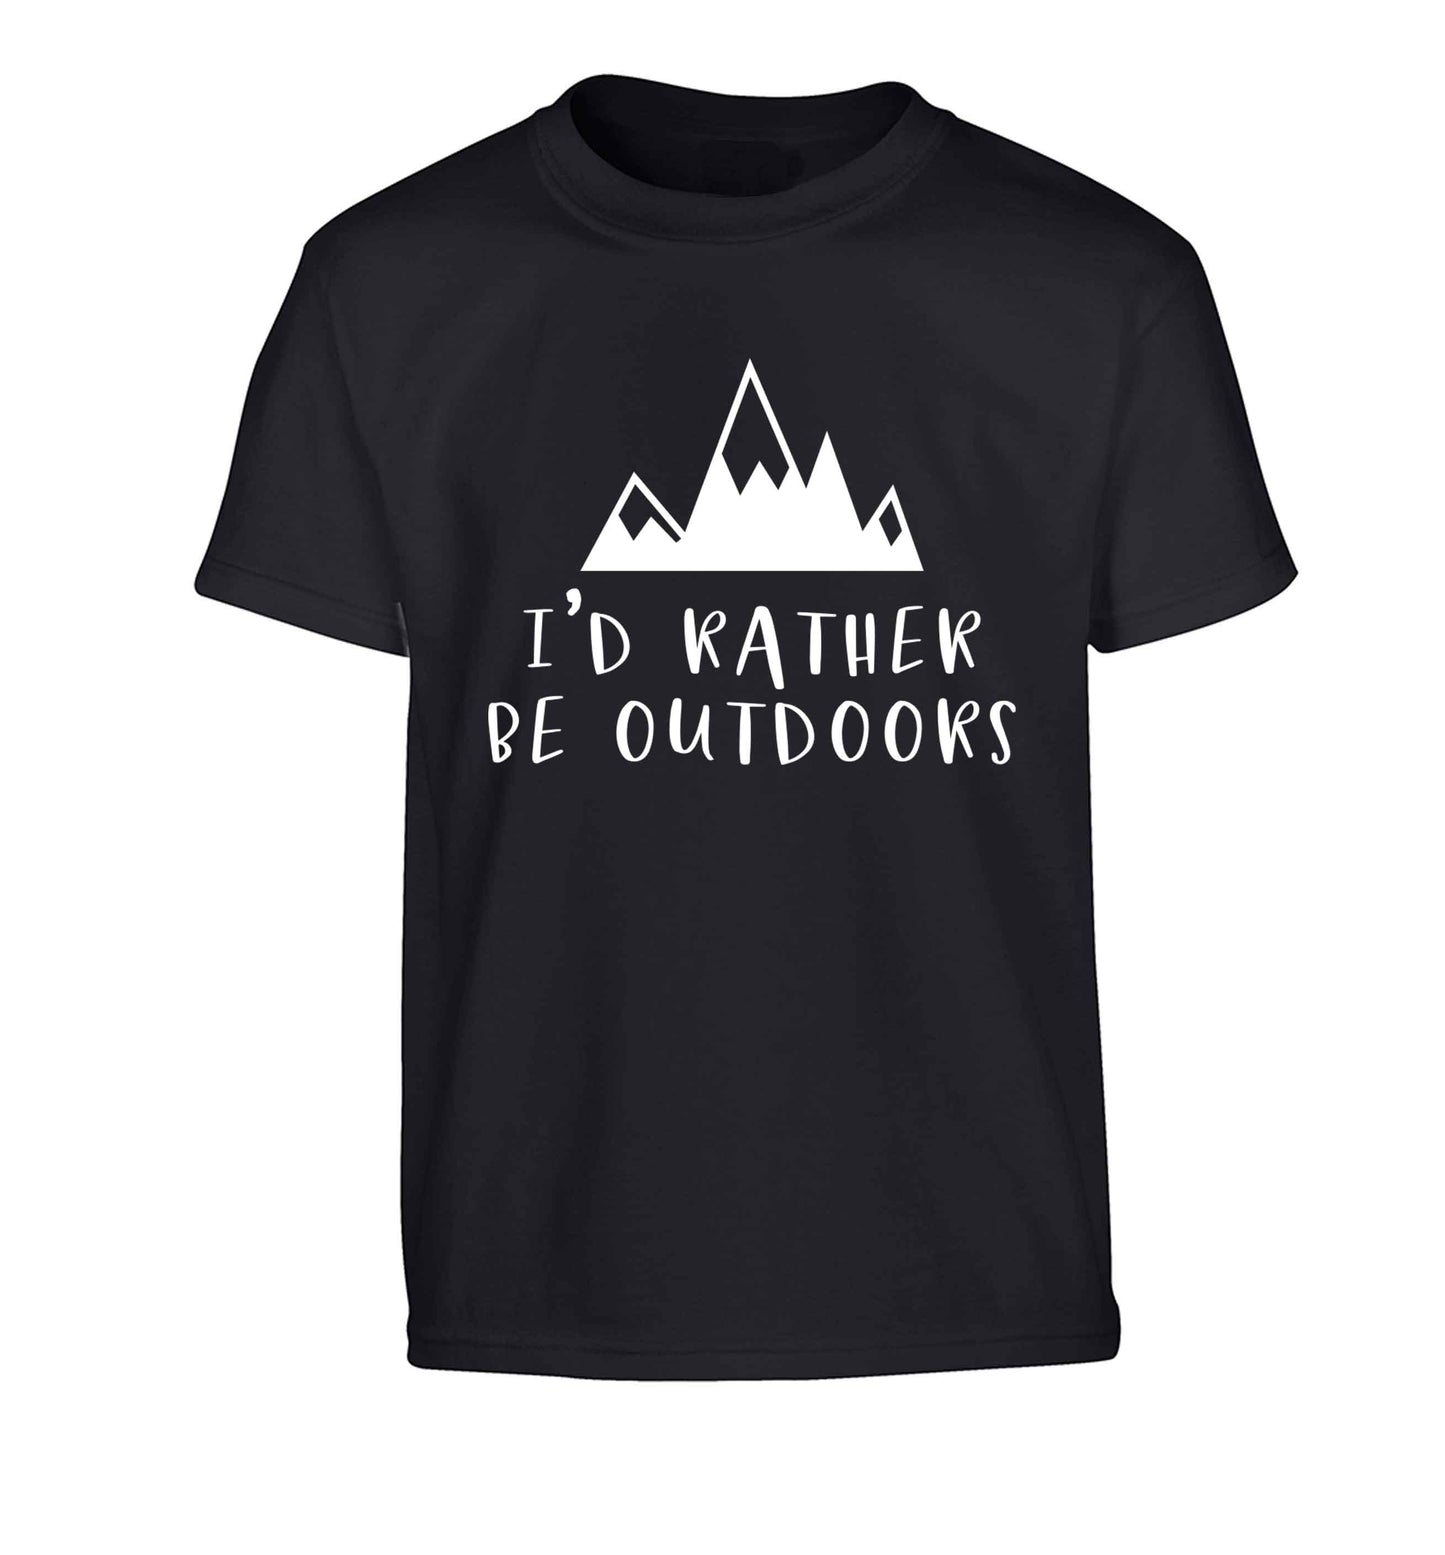 I'd rather be outdoors Children's black Tshirt 12-13 Years